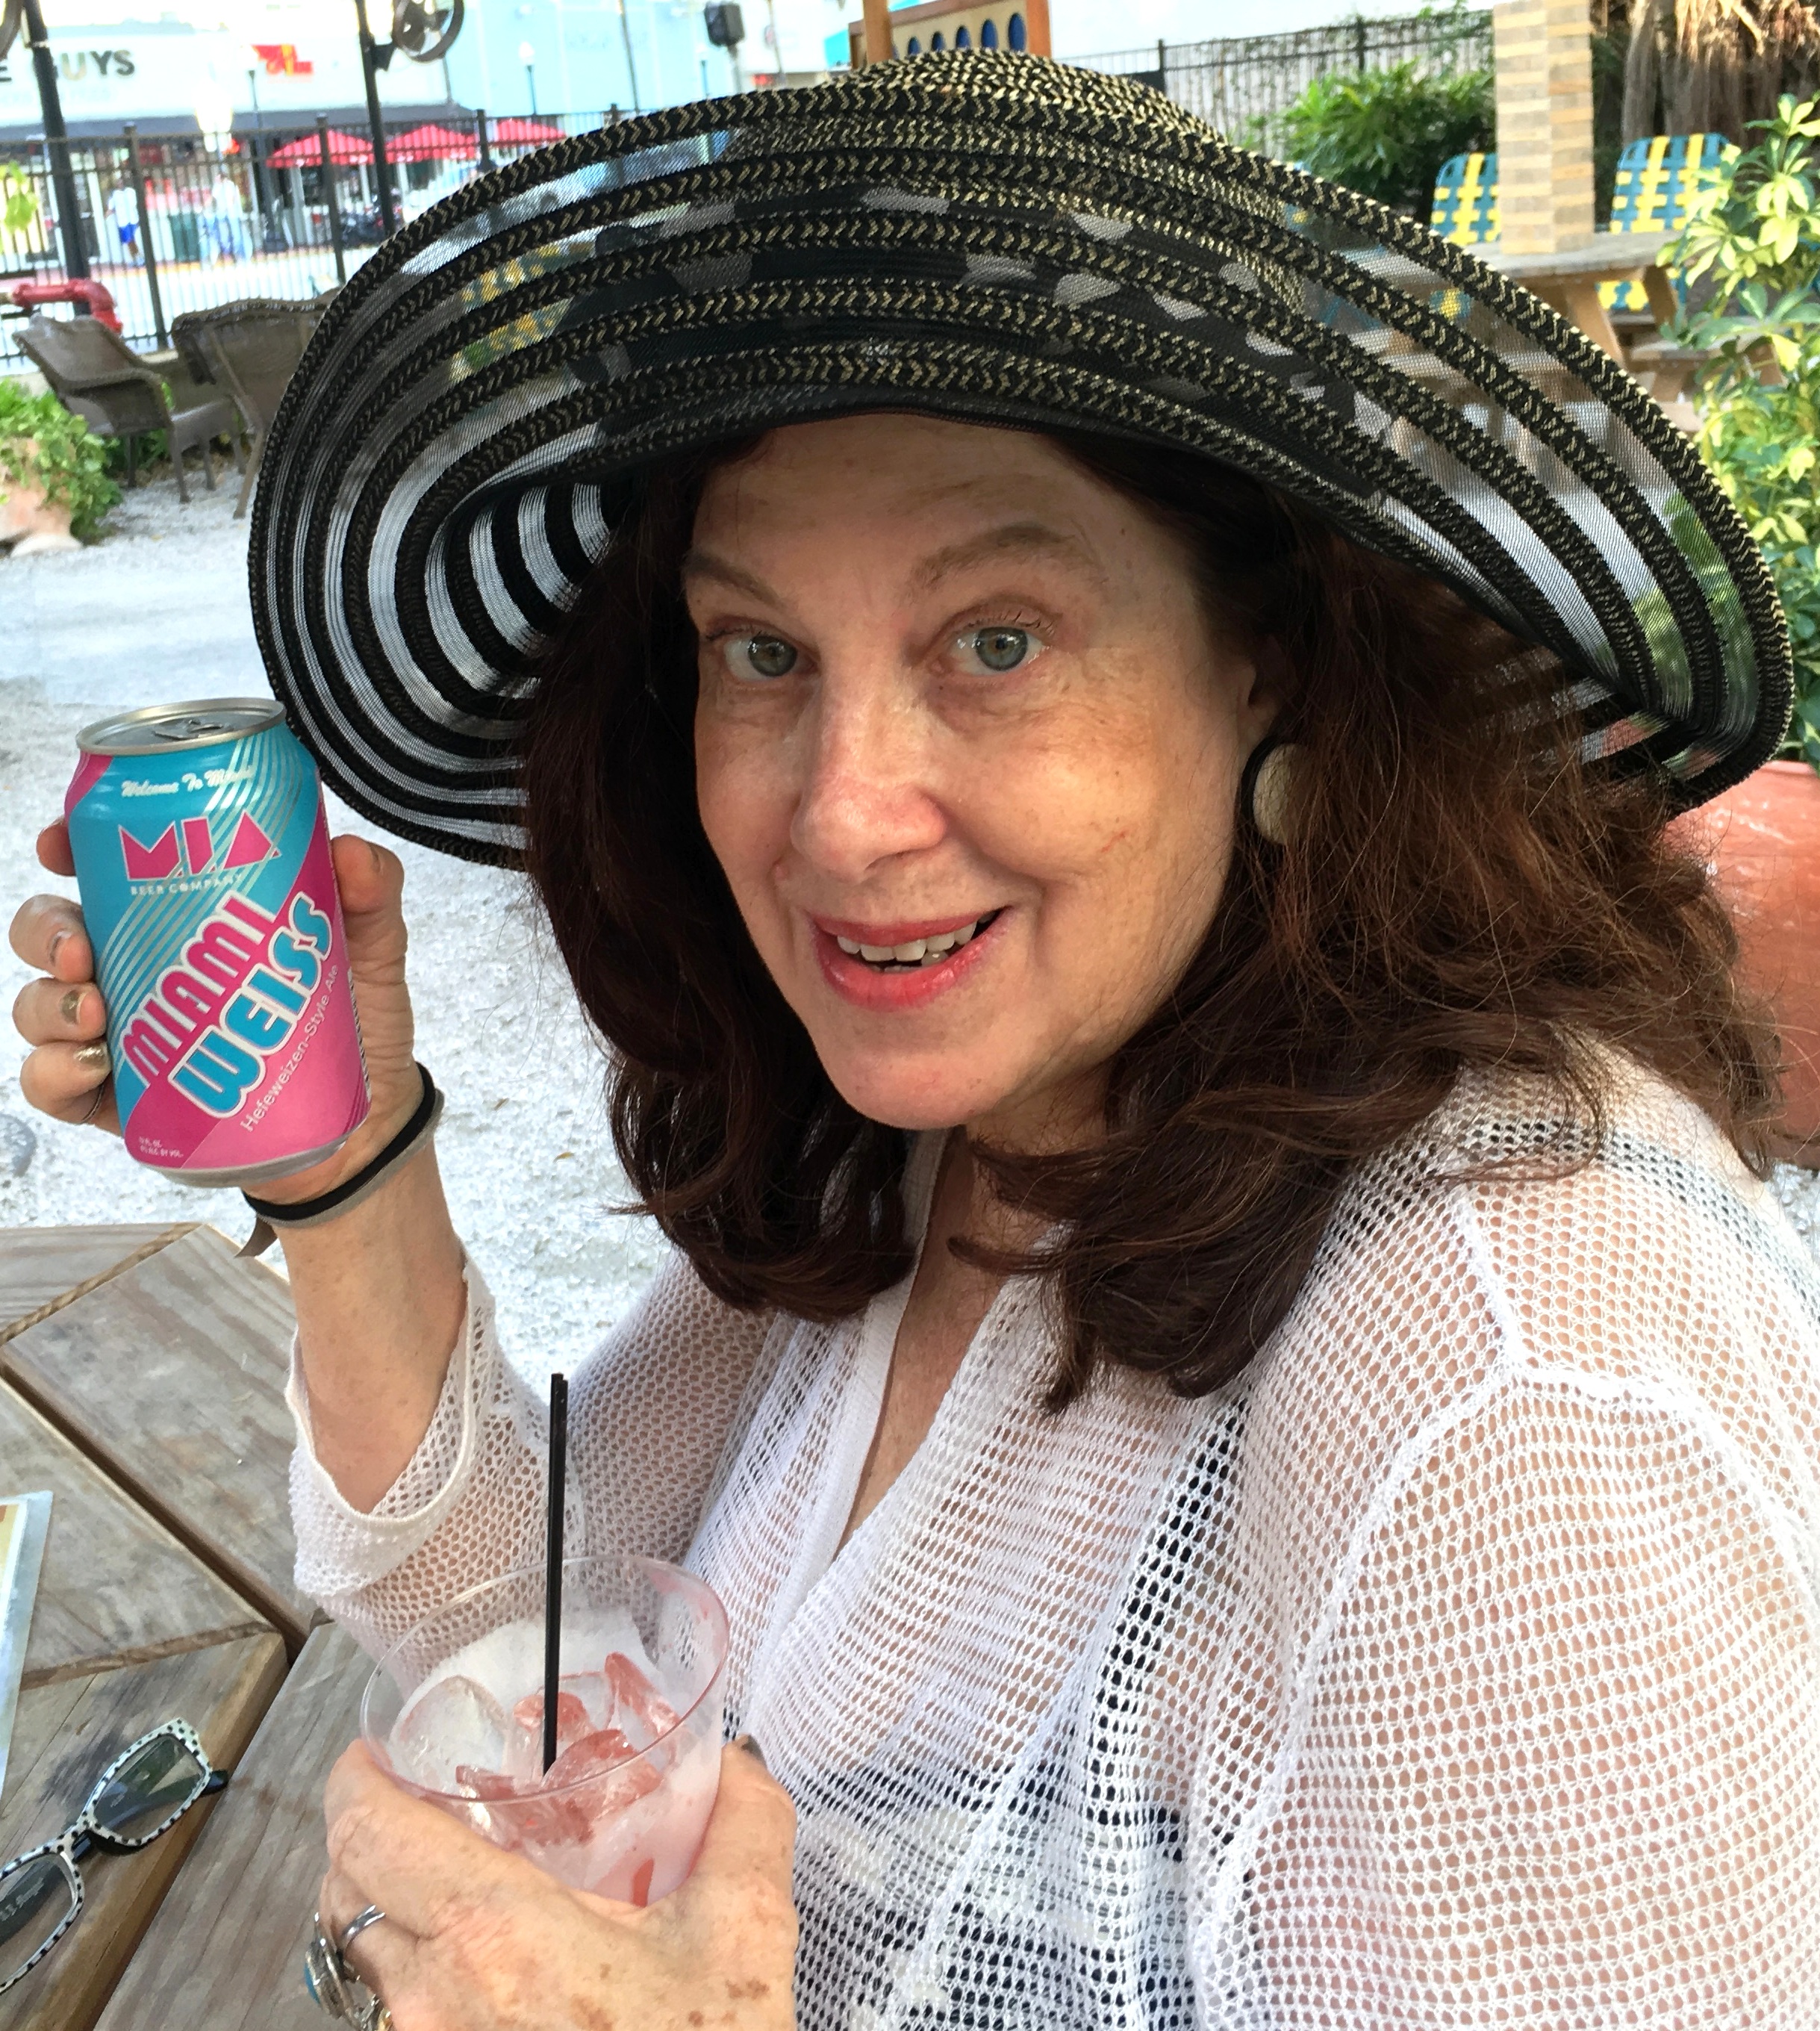 Pattie with Miami Weiss beer (no relation).jpg